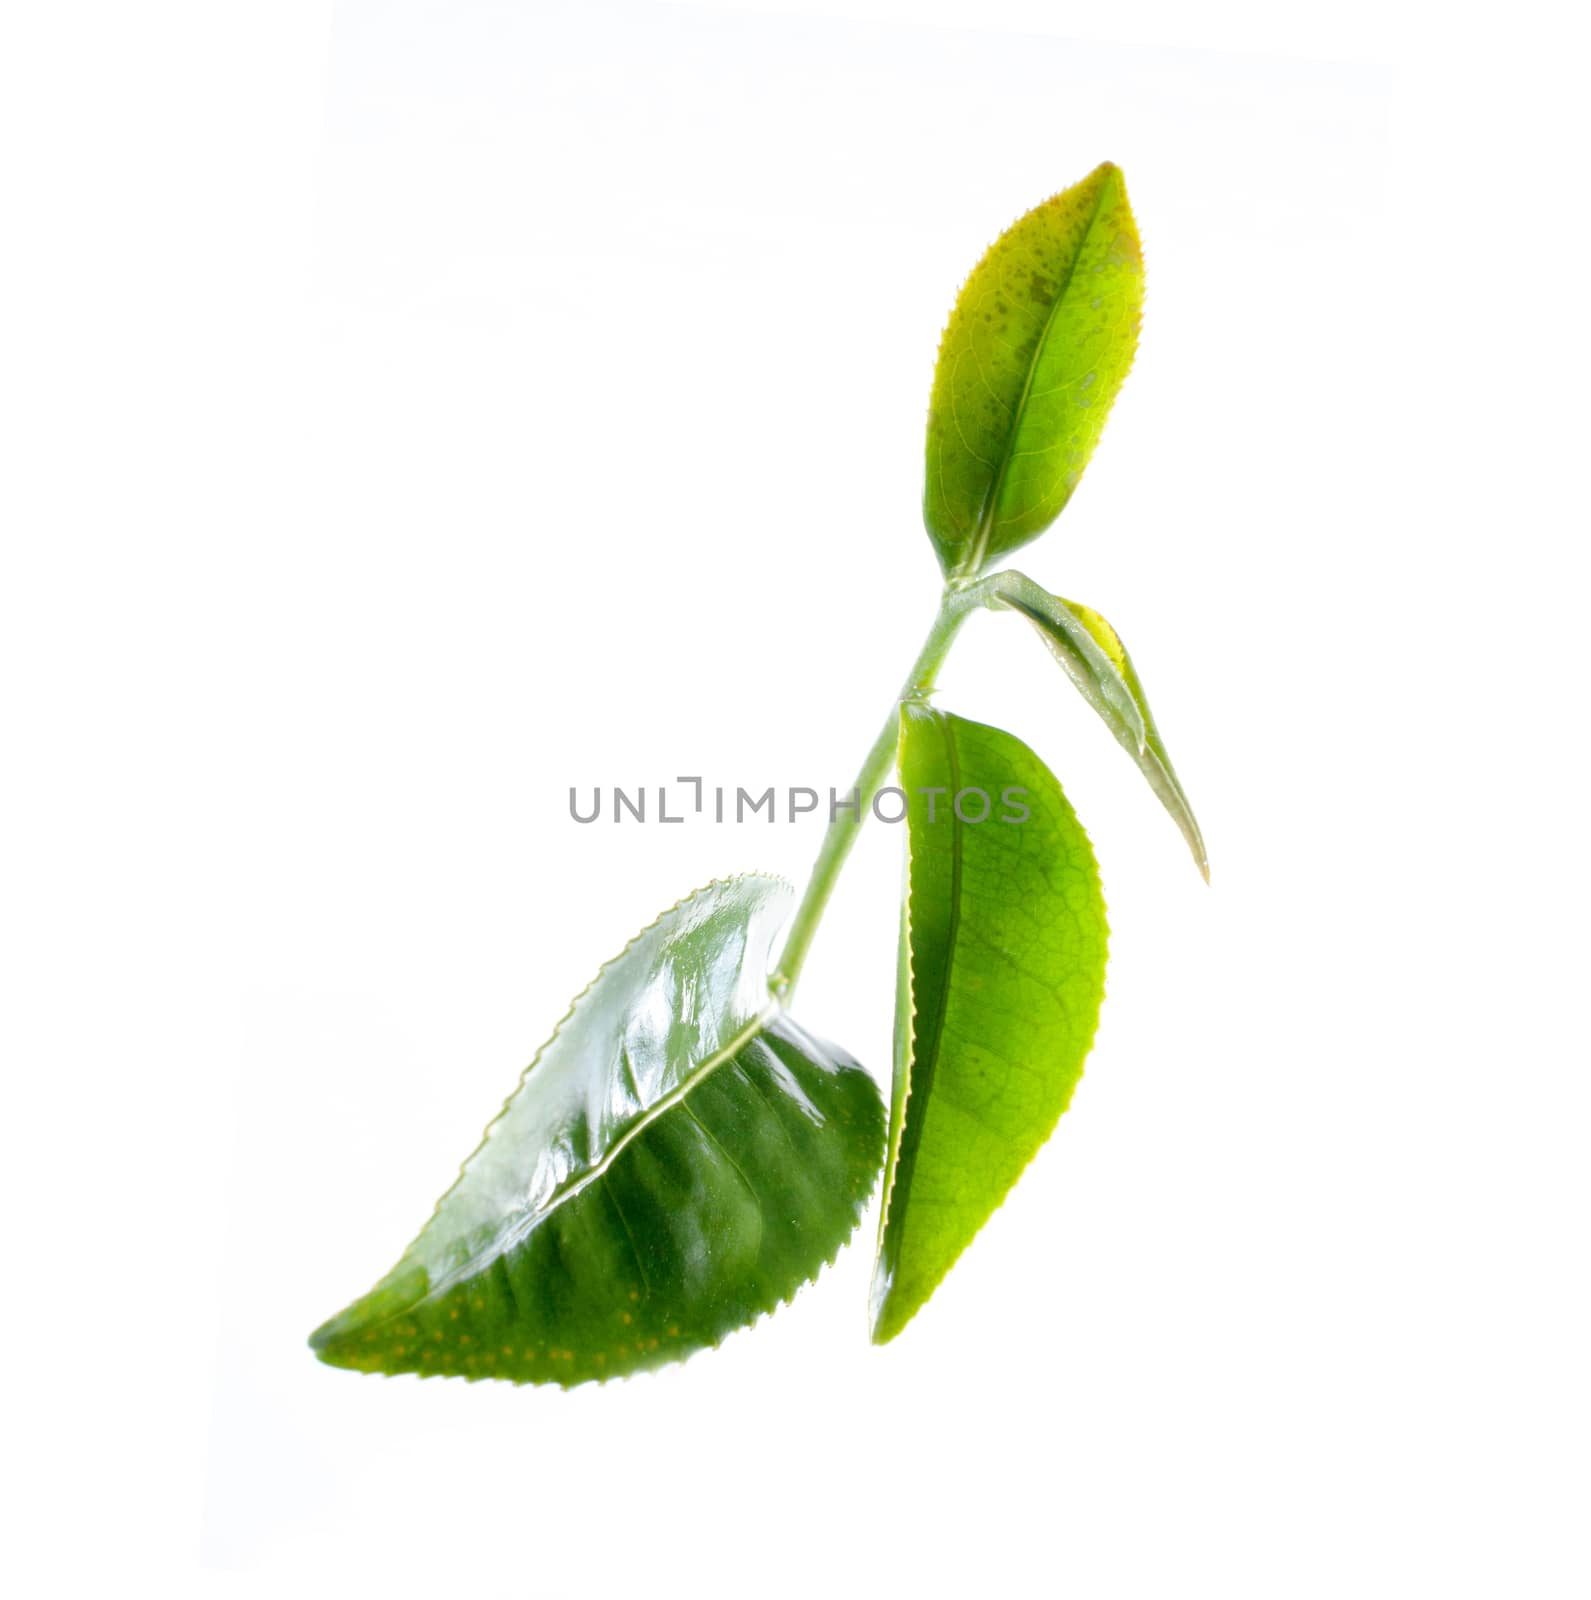 green tea leaves close up on white background by gukgui